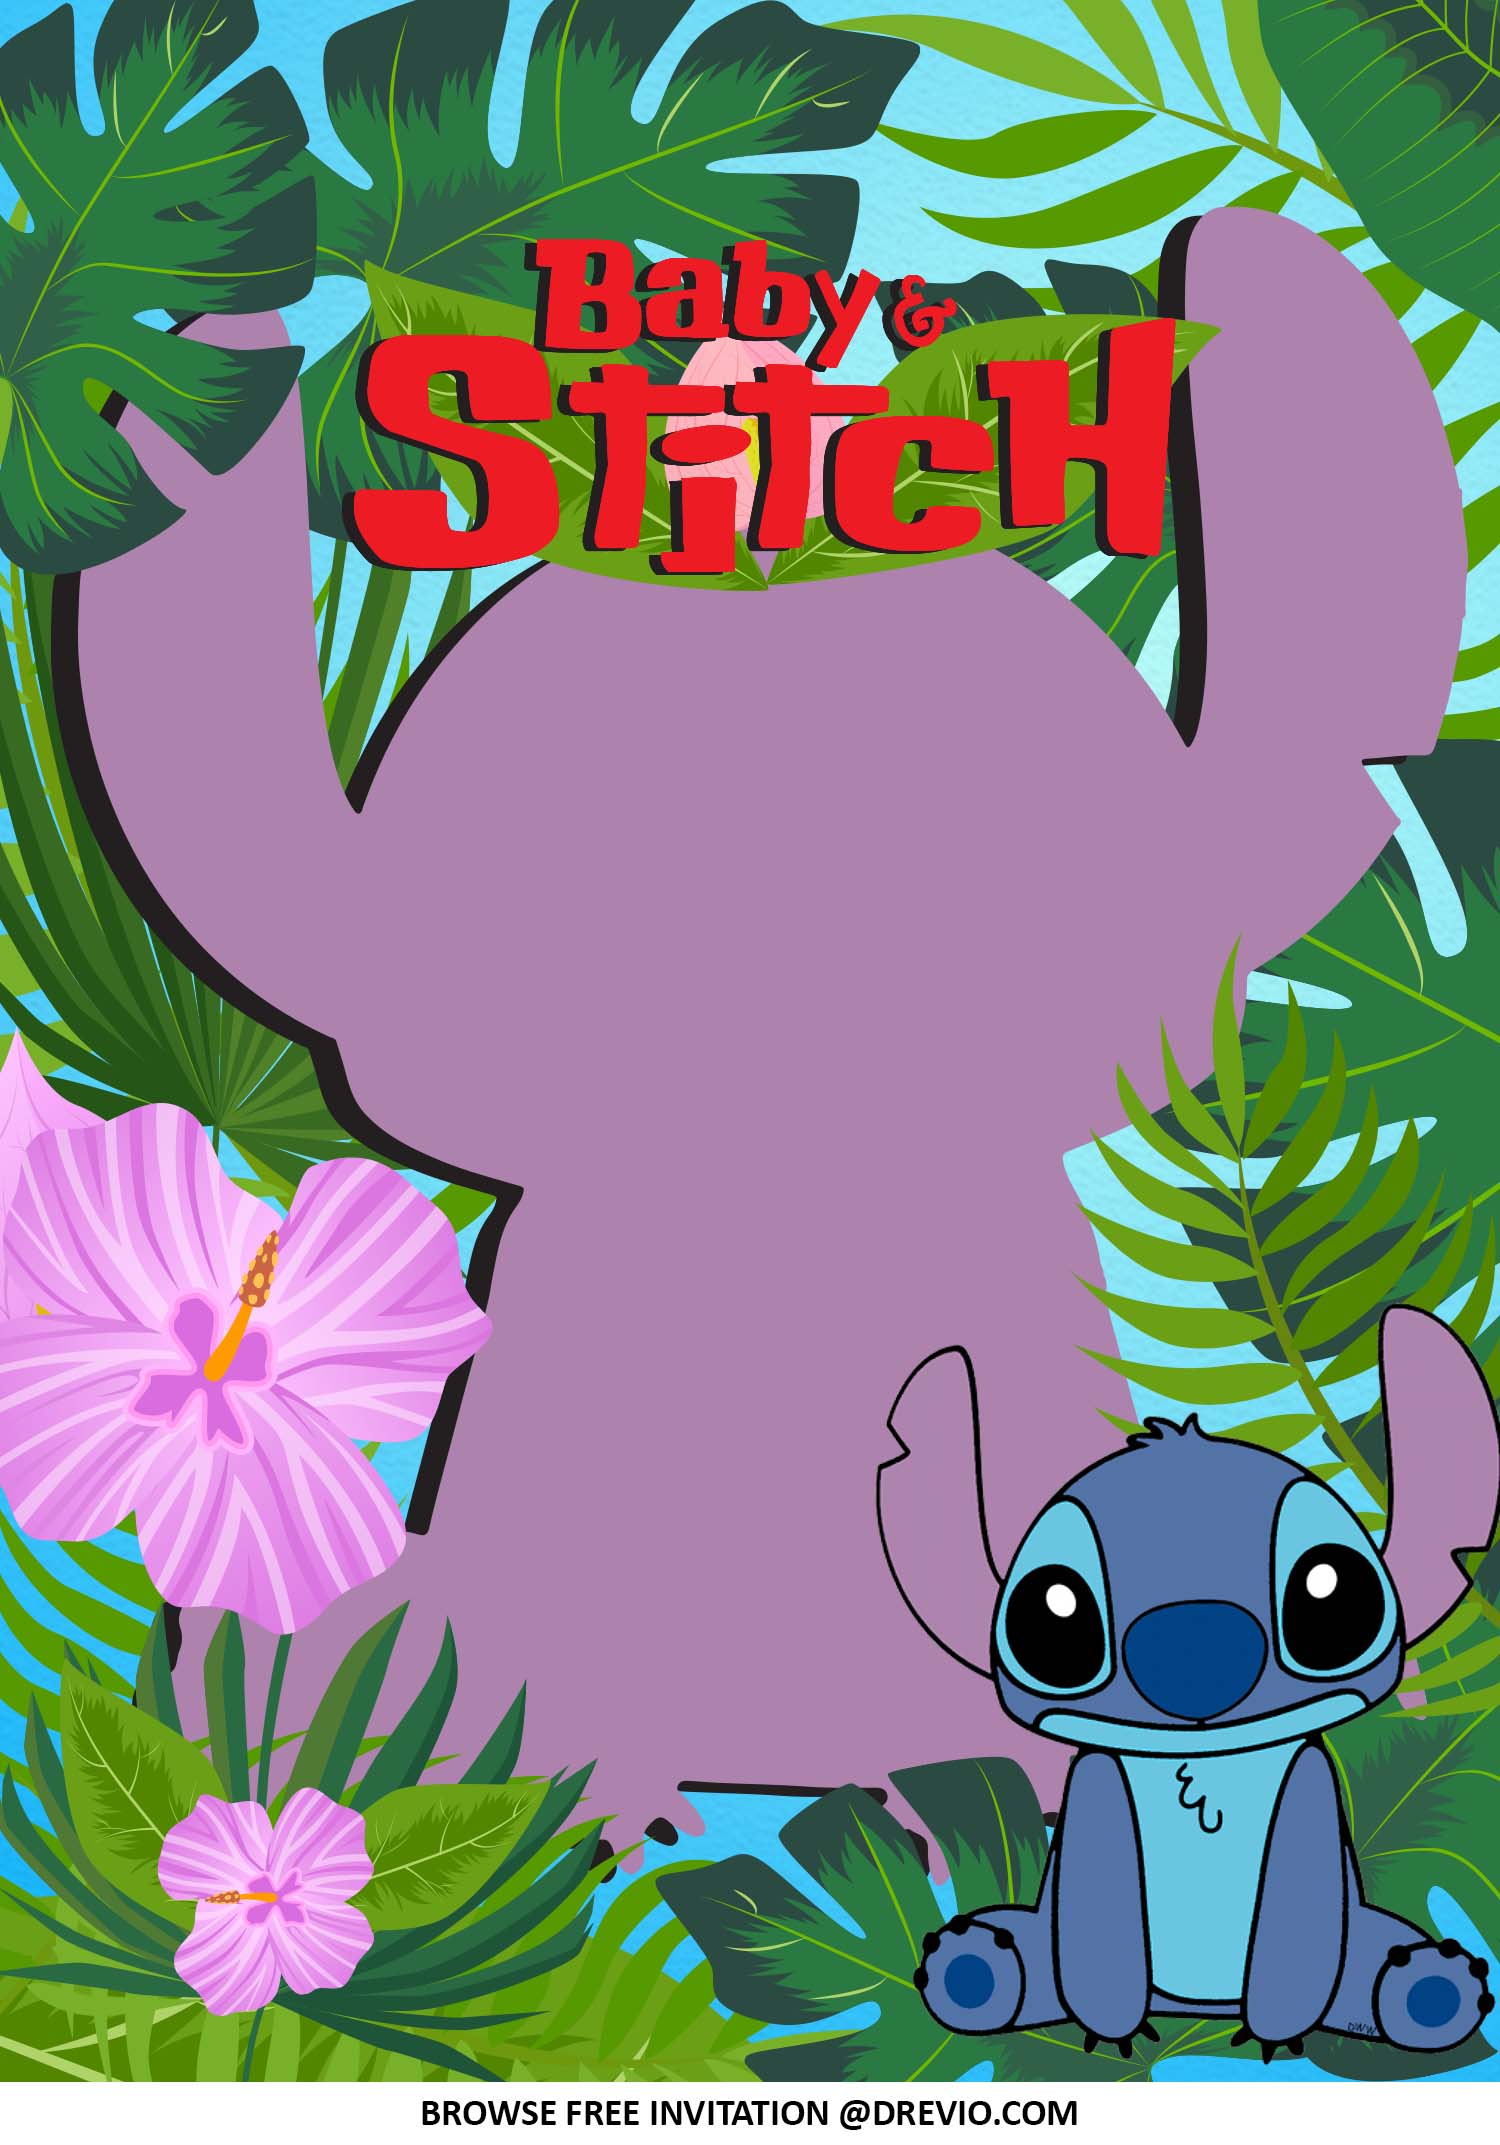 Lilo and Stitch Baby Shower Invitations + Party Ideas